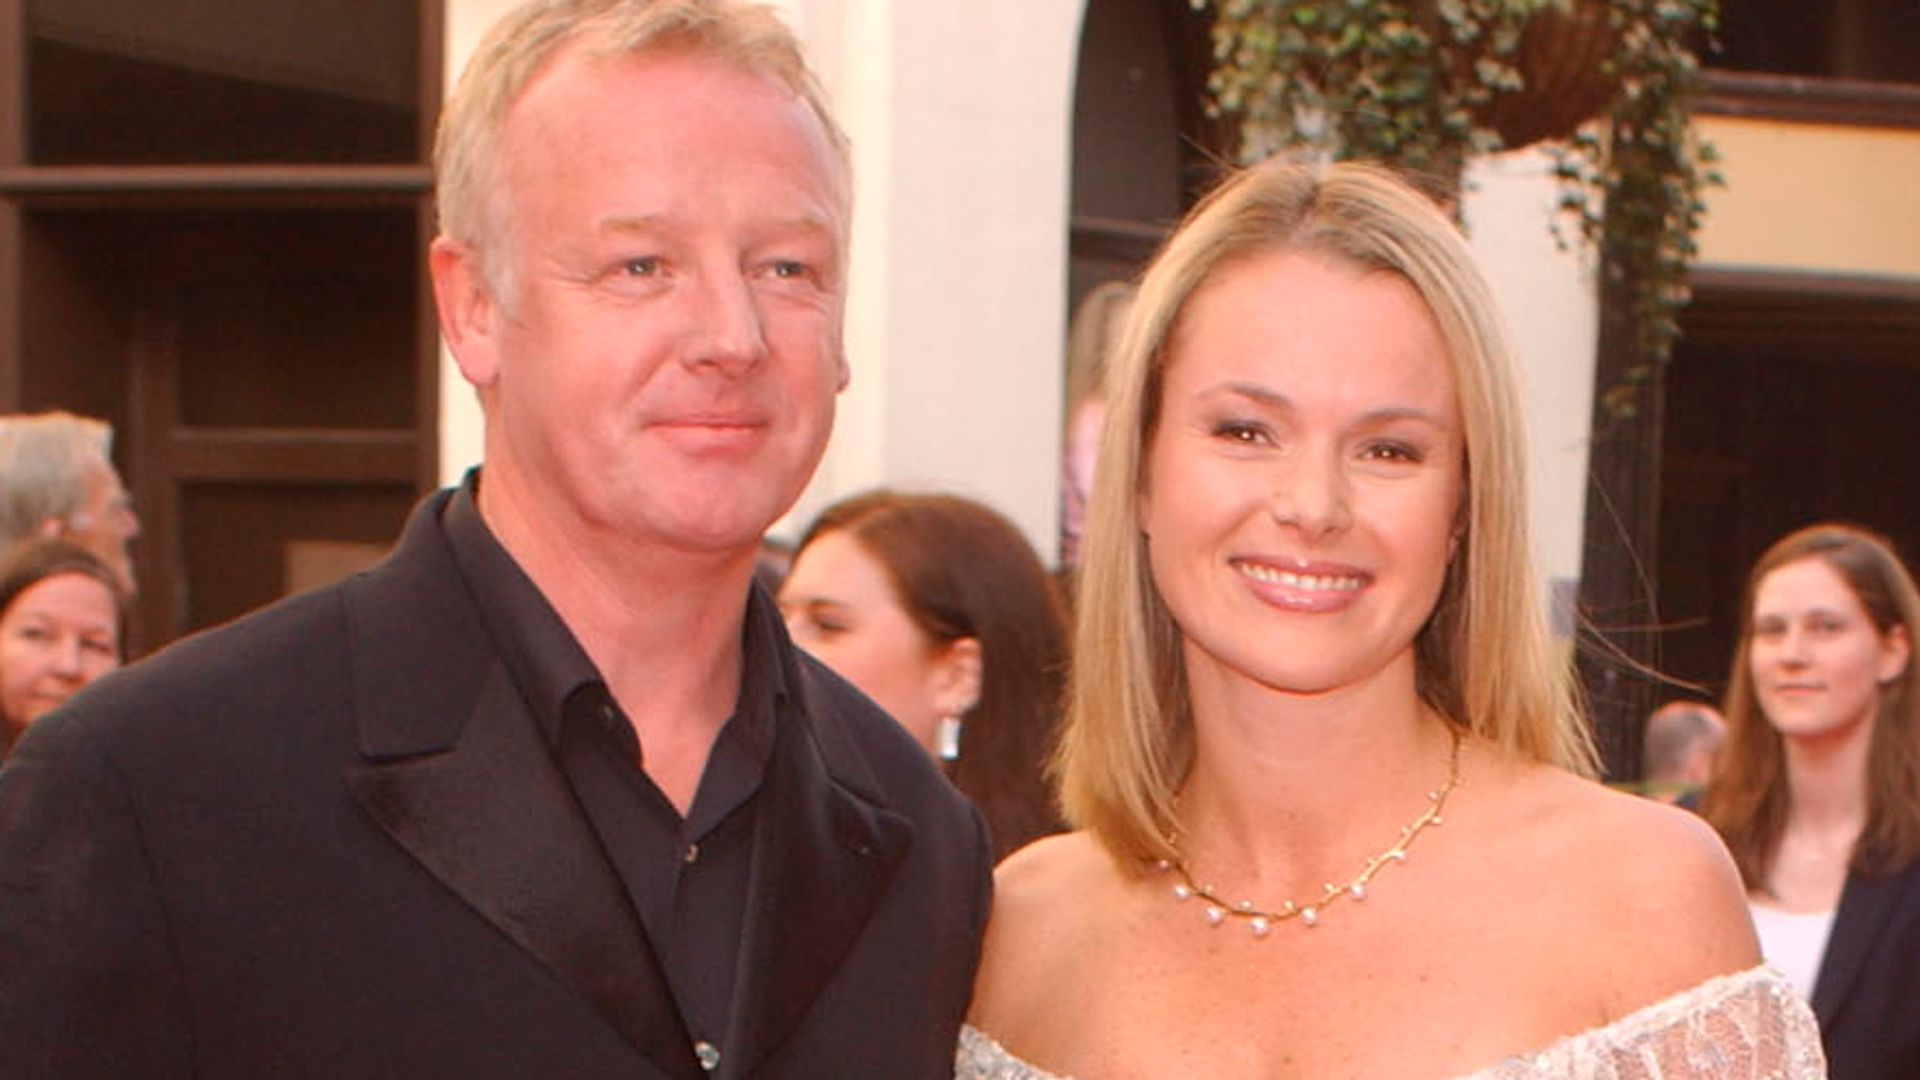 Les Dennis in a suit and ex-wife Amanda Holden in a white dress on the red carpet